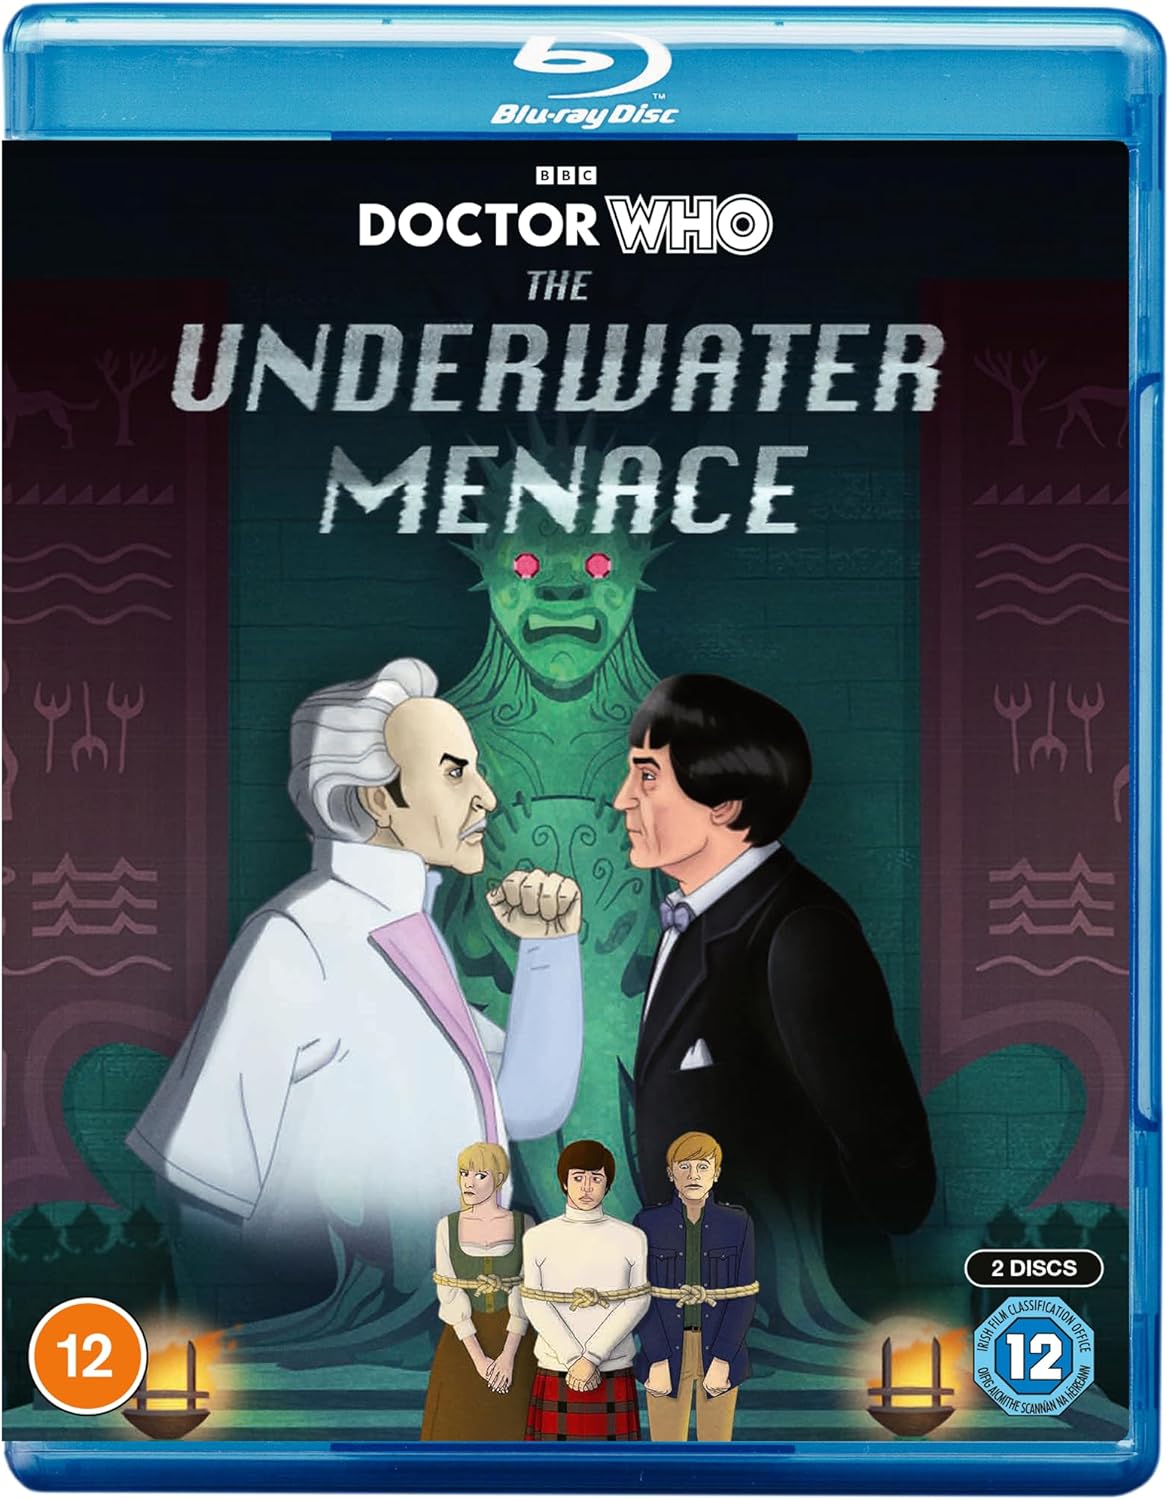 Region 2 Special Edition Blu-ray cover